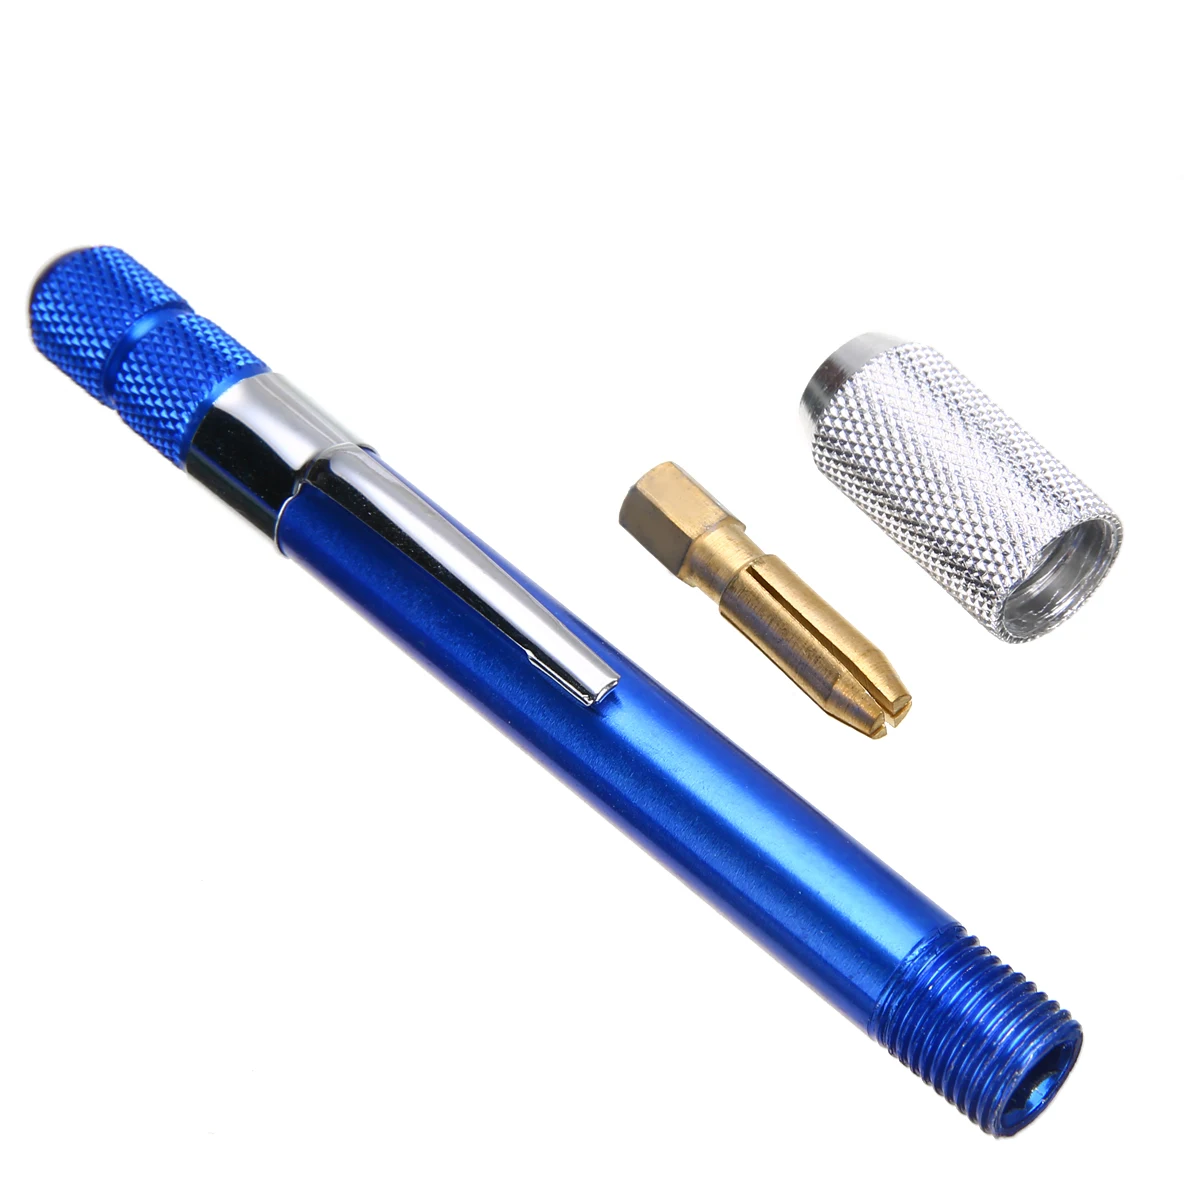 1pc Aluminum Hand Drill with 21pcs Mini Drill Bit Set and Plastic Case For Hobby DIY Craft Jewelry Making